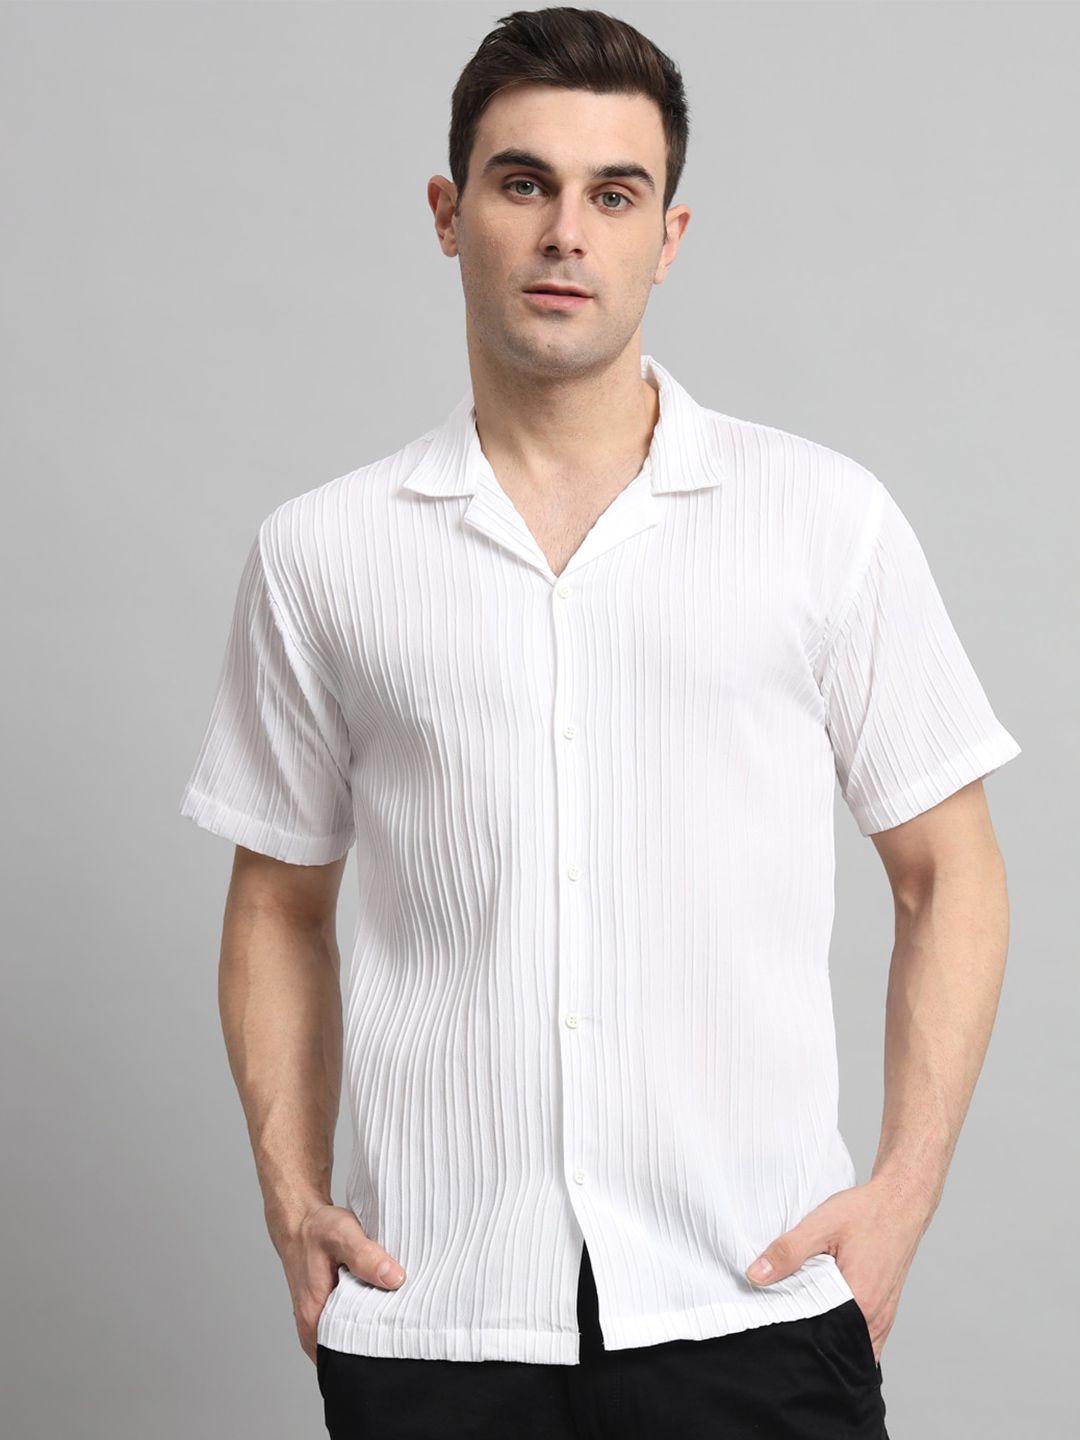 Wuxi Classic Striped Spread Collar Short Sleeves Casual Shirt